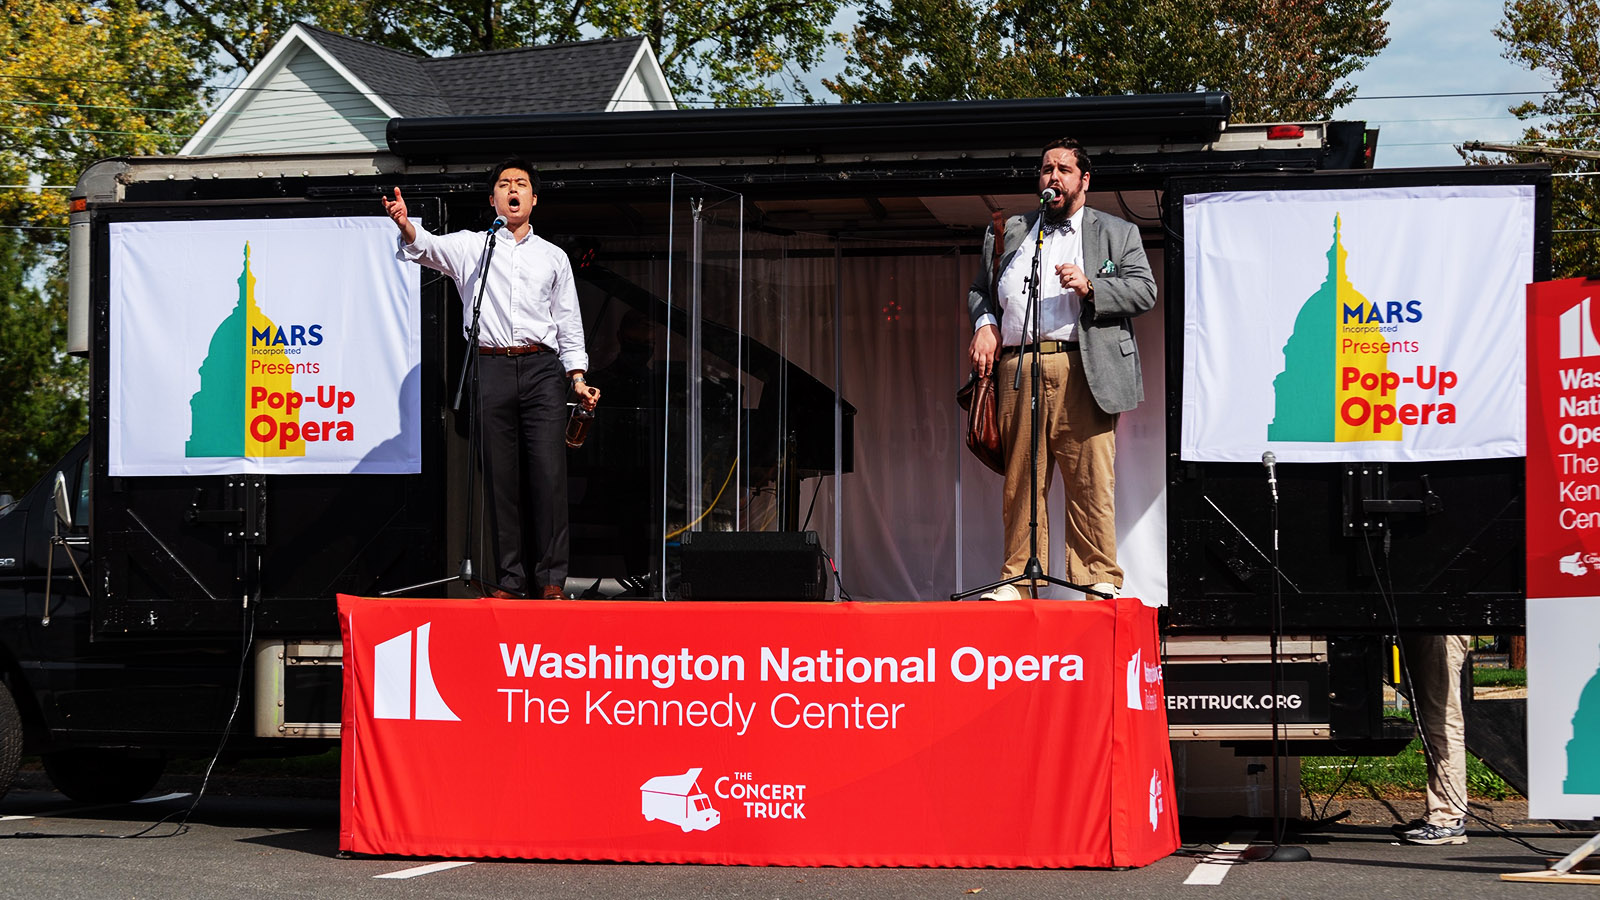 Two male singers perform from an outdoor stage on a truck in the daytime.